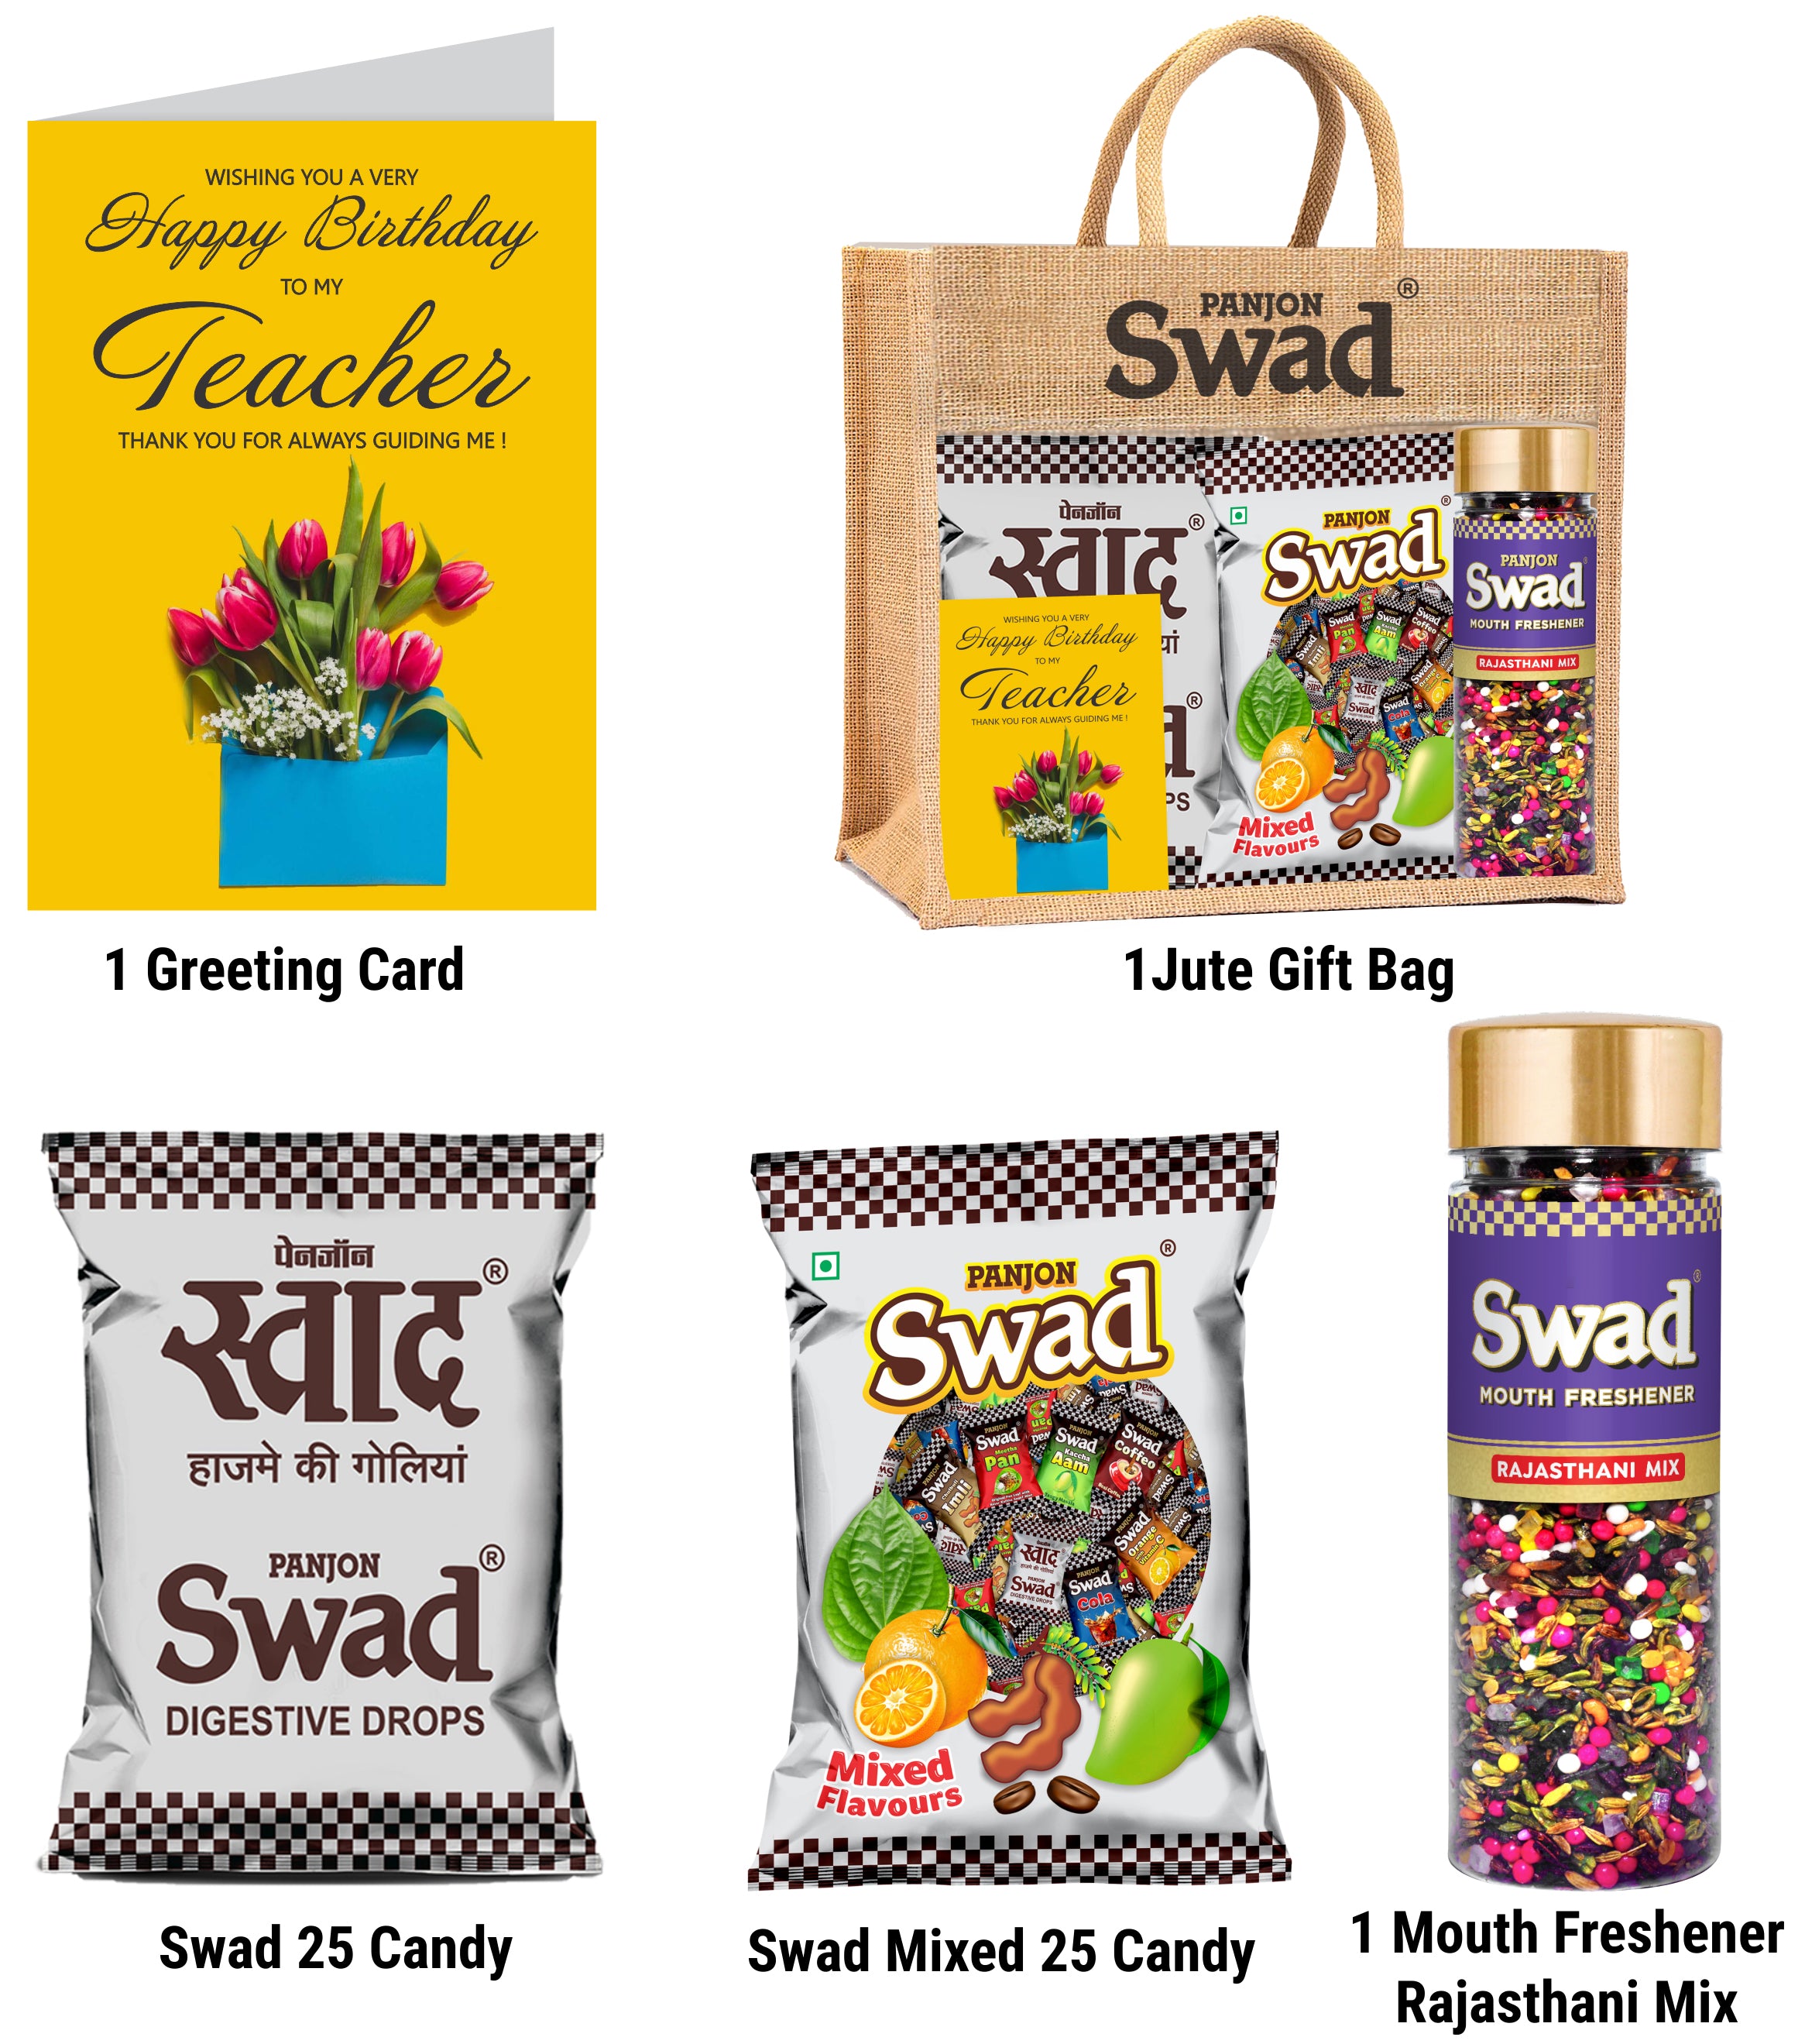 Swad Happy Birthday Teacher Gift with Card (25 Swad Candy, 25 Mixed Toffee, Rajasthani Mix Mukhwas) in Jute Bag